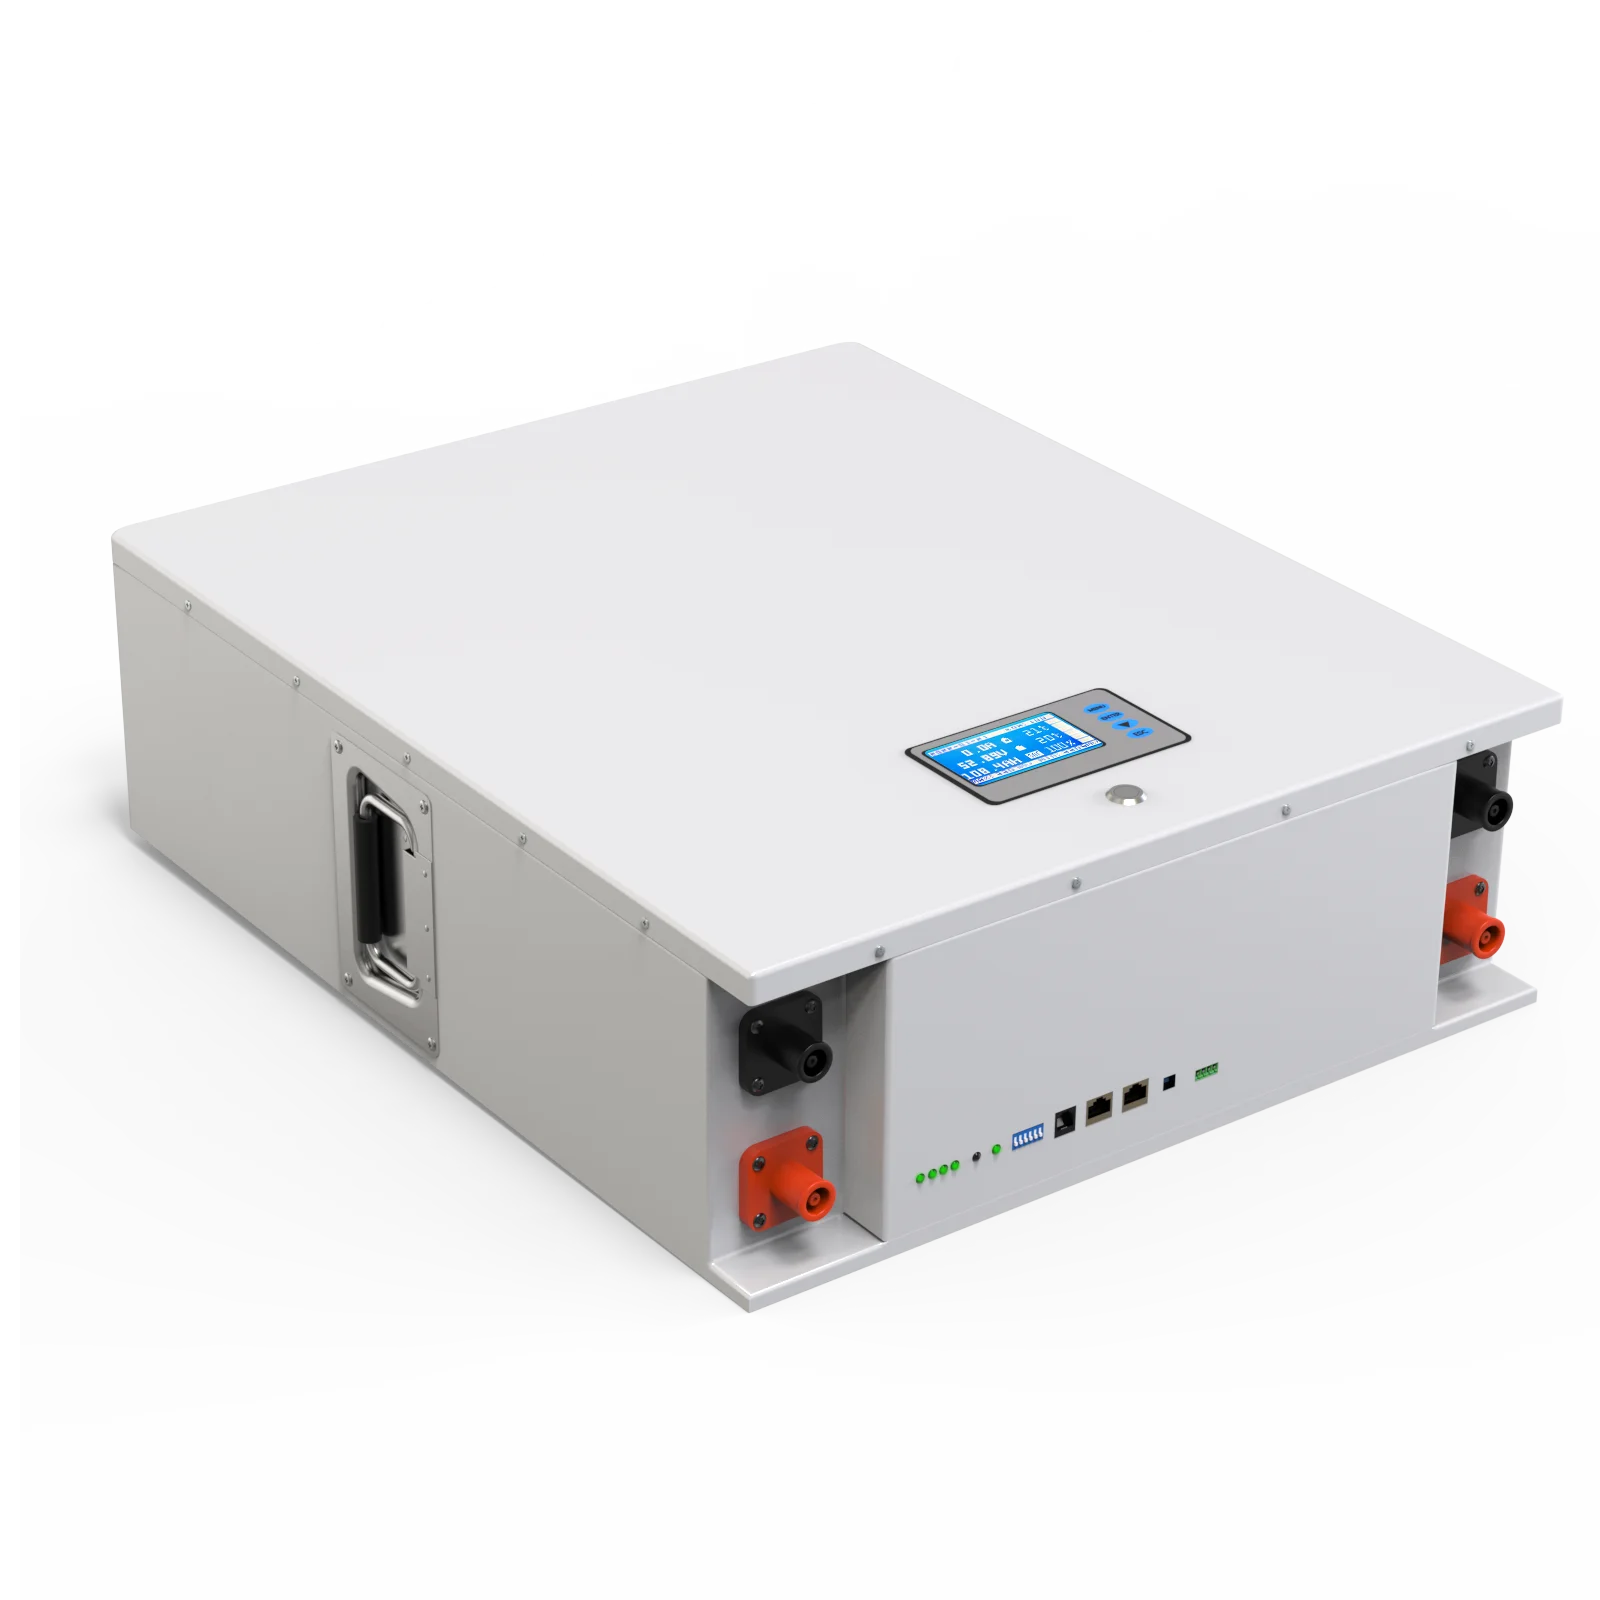 CERRNSS 48V 100Ah LiFePO4 Lithium Battery, Built-in battery management system ensures cell consistency and longevity.